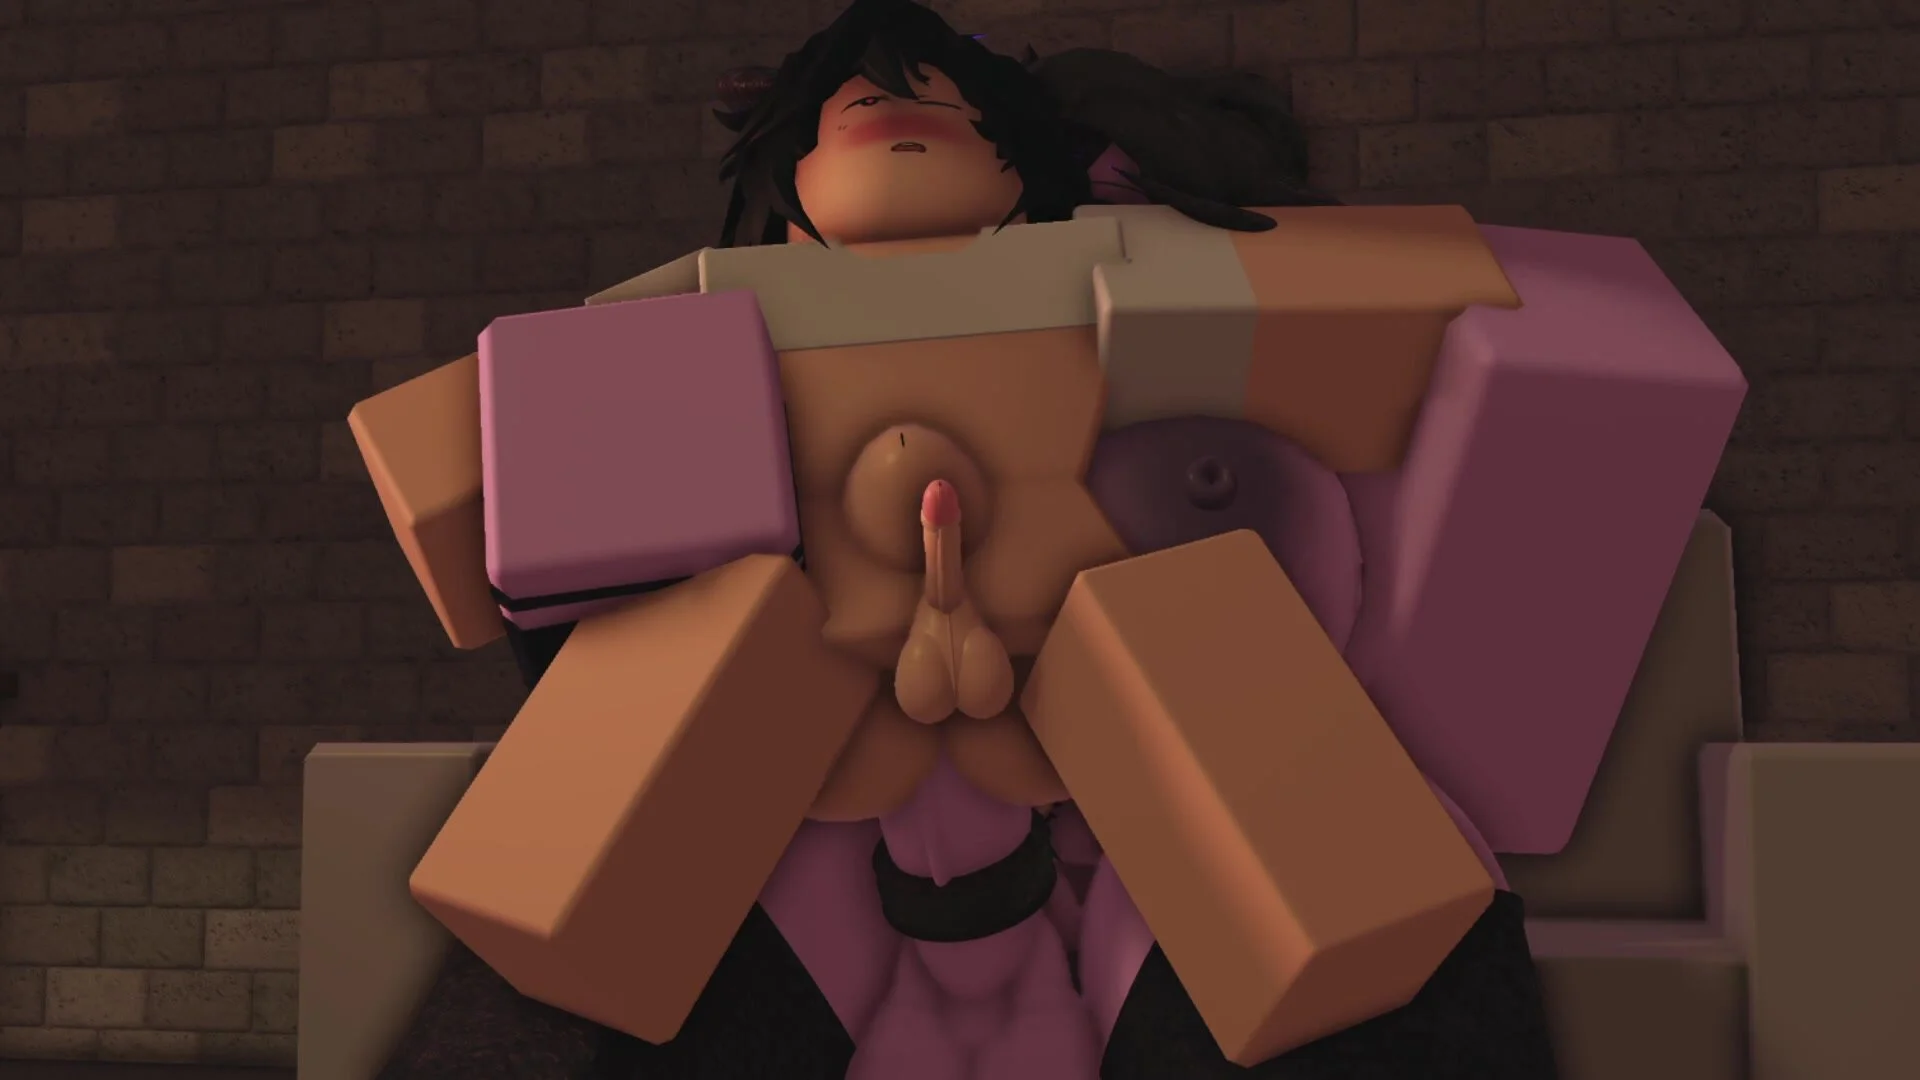 Experience the Best Roblox Feet R34 Photos and Videos for Your Foot Fetish!